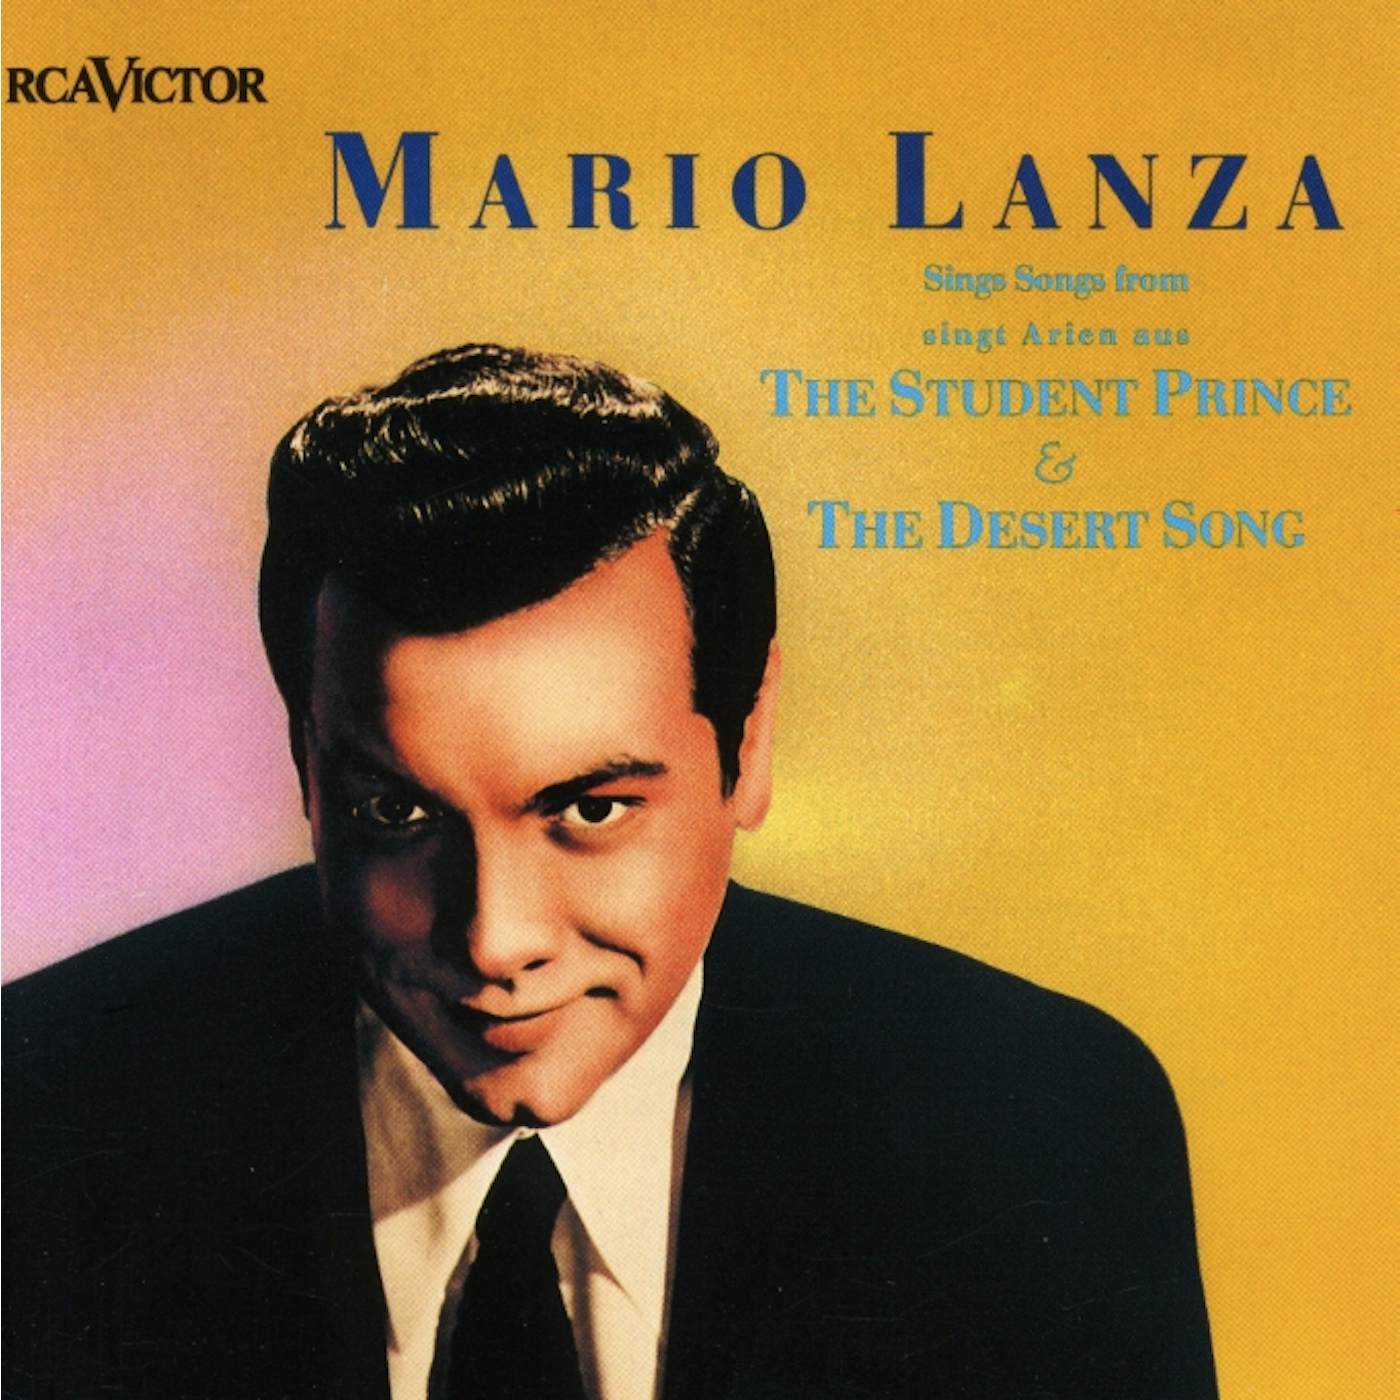 MARIO LANZA SINGS SONGS FROM THE STUDENT CD